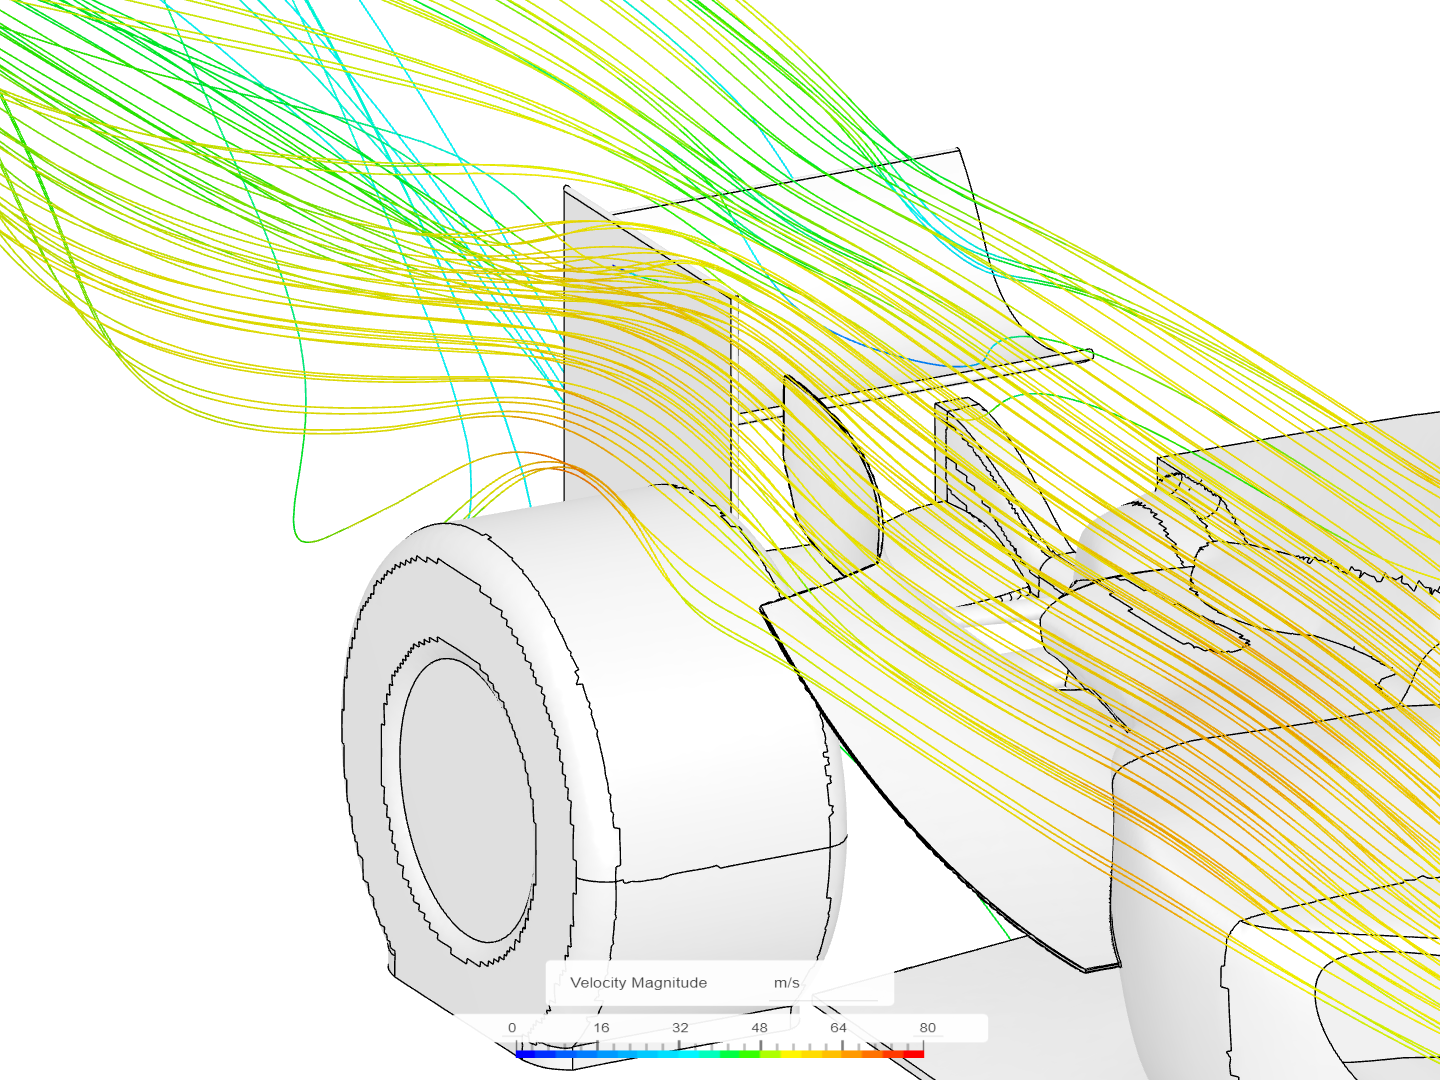 CFD Analysis of Airflow around a F1 Car to Test Aerodynamics - Copy for my presentation image